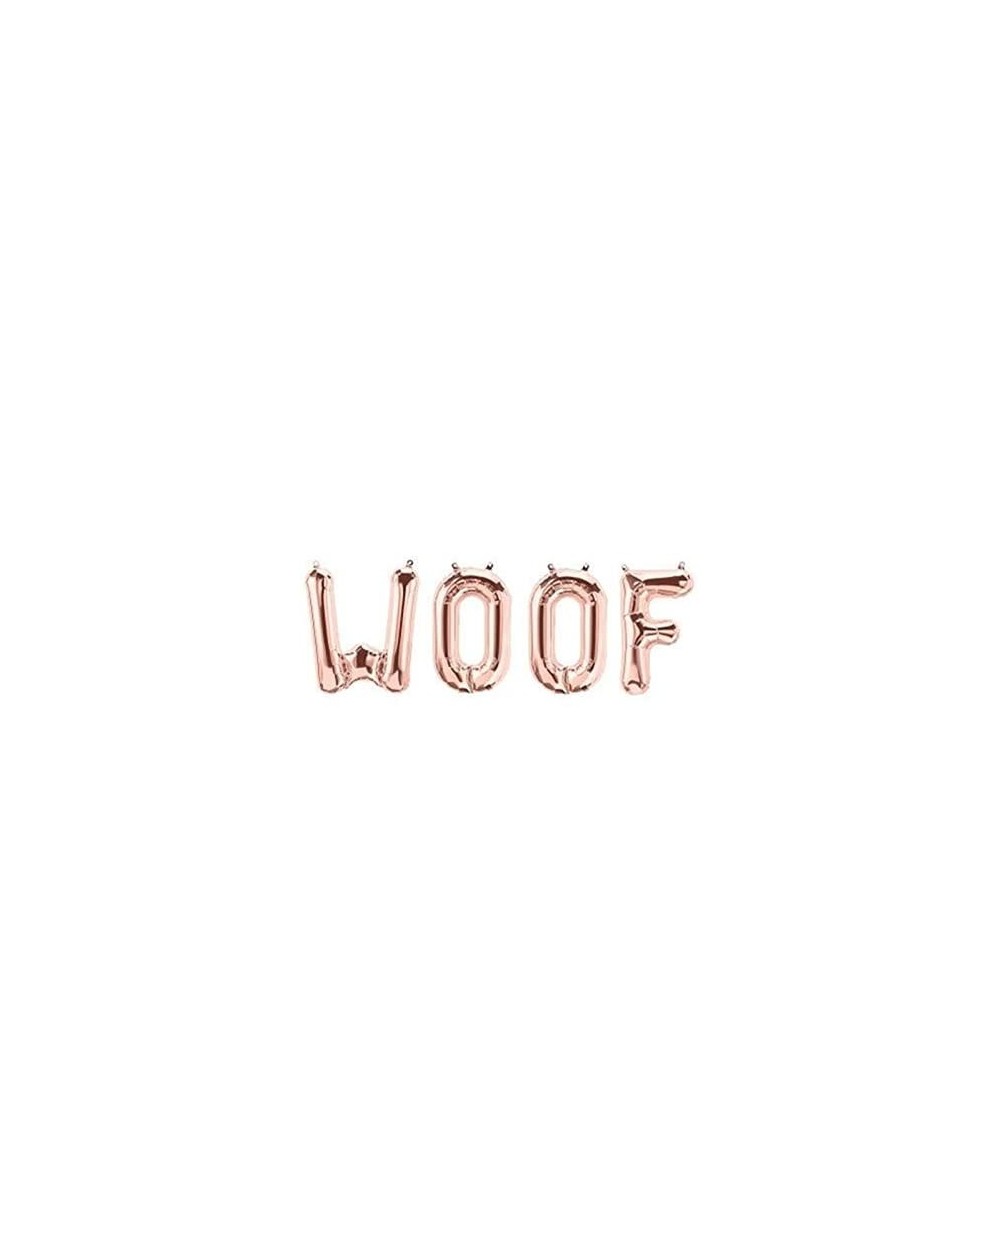 Balloons Balloon Woof Balloon for dog Balloon for Party WOOF -16 ROSE GOLD FOIL LETTER BALLOON PACK-Woof Birthday- Woof Birth...